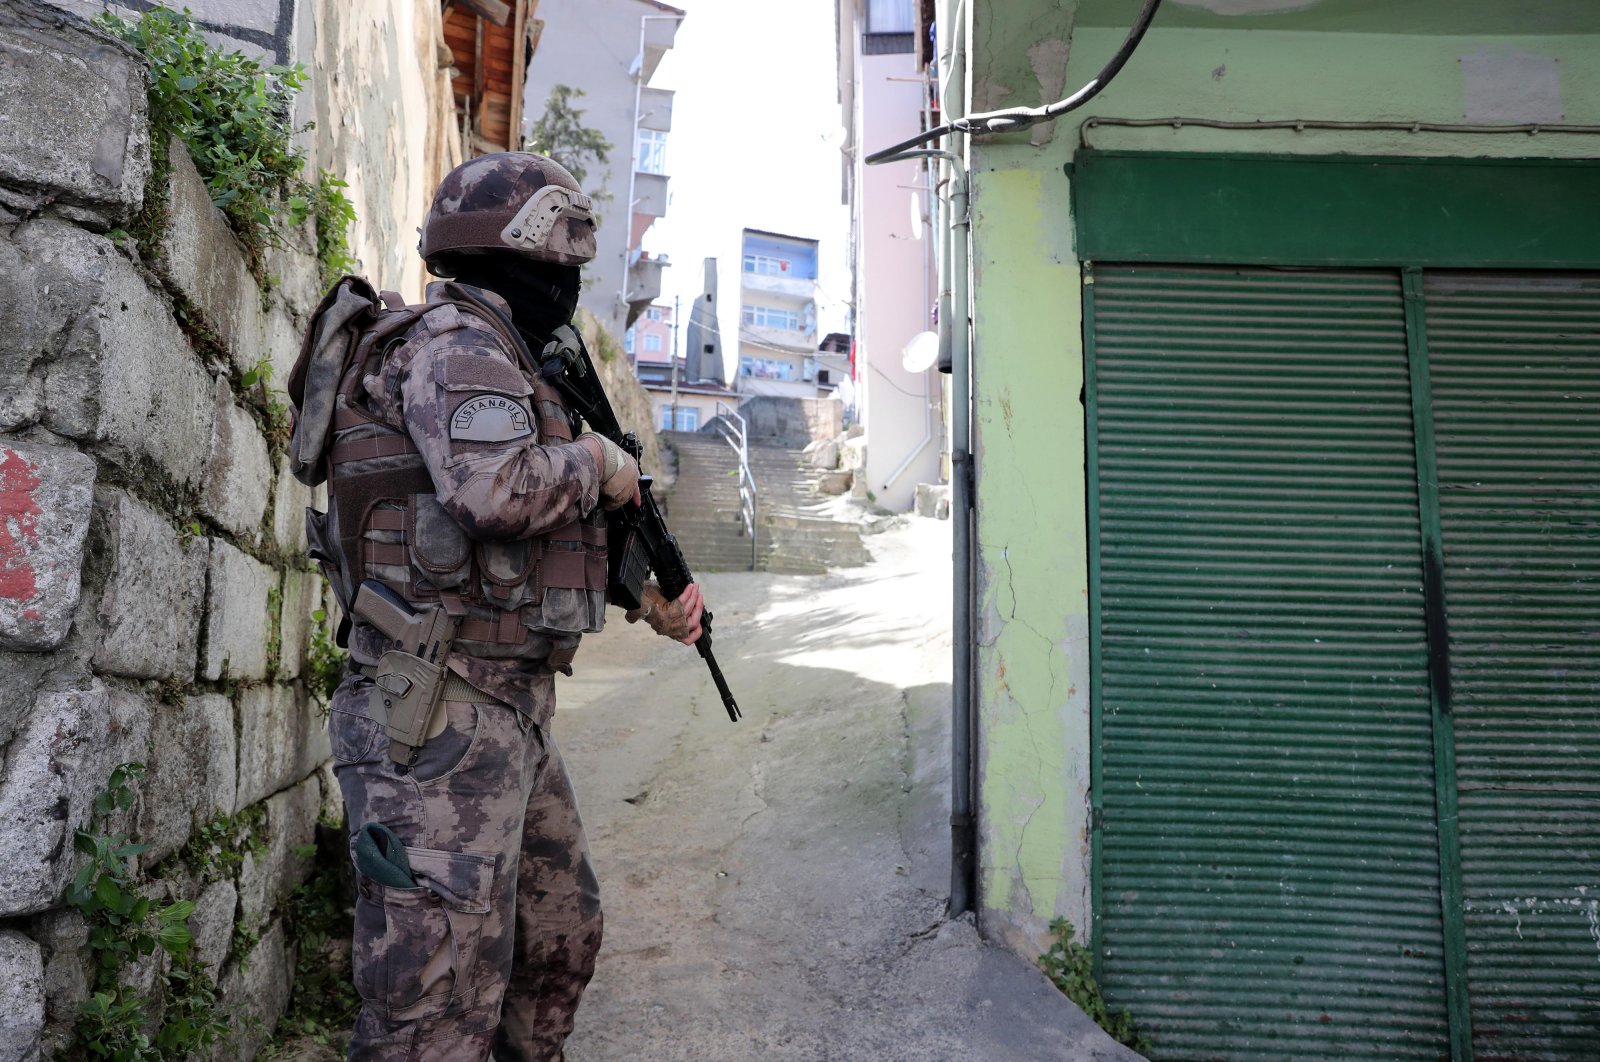 Turkish special operation forces conduct an operation against narcotic crimes in Istanbul, Turkey, May 1, 2020. (DHA Photo)